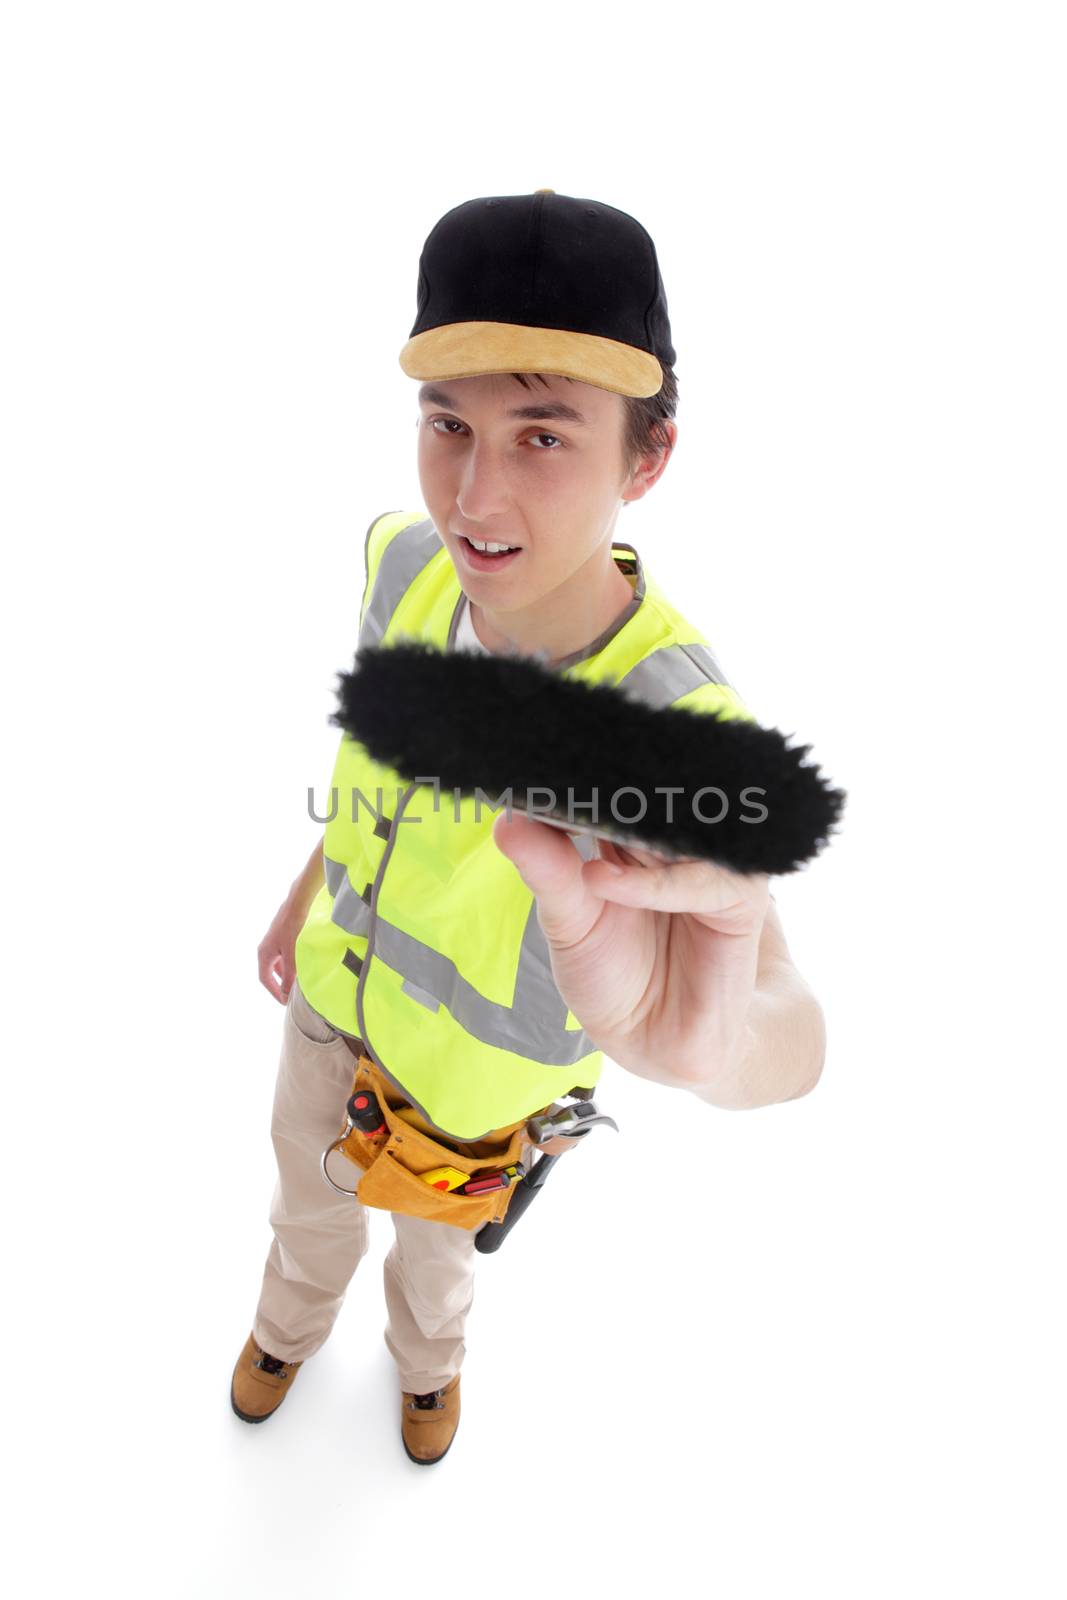 Young handyman teenage apprentice painter wearing work clothes and holding a paintbrush.  White background